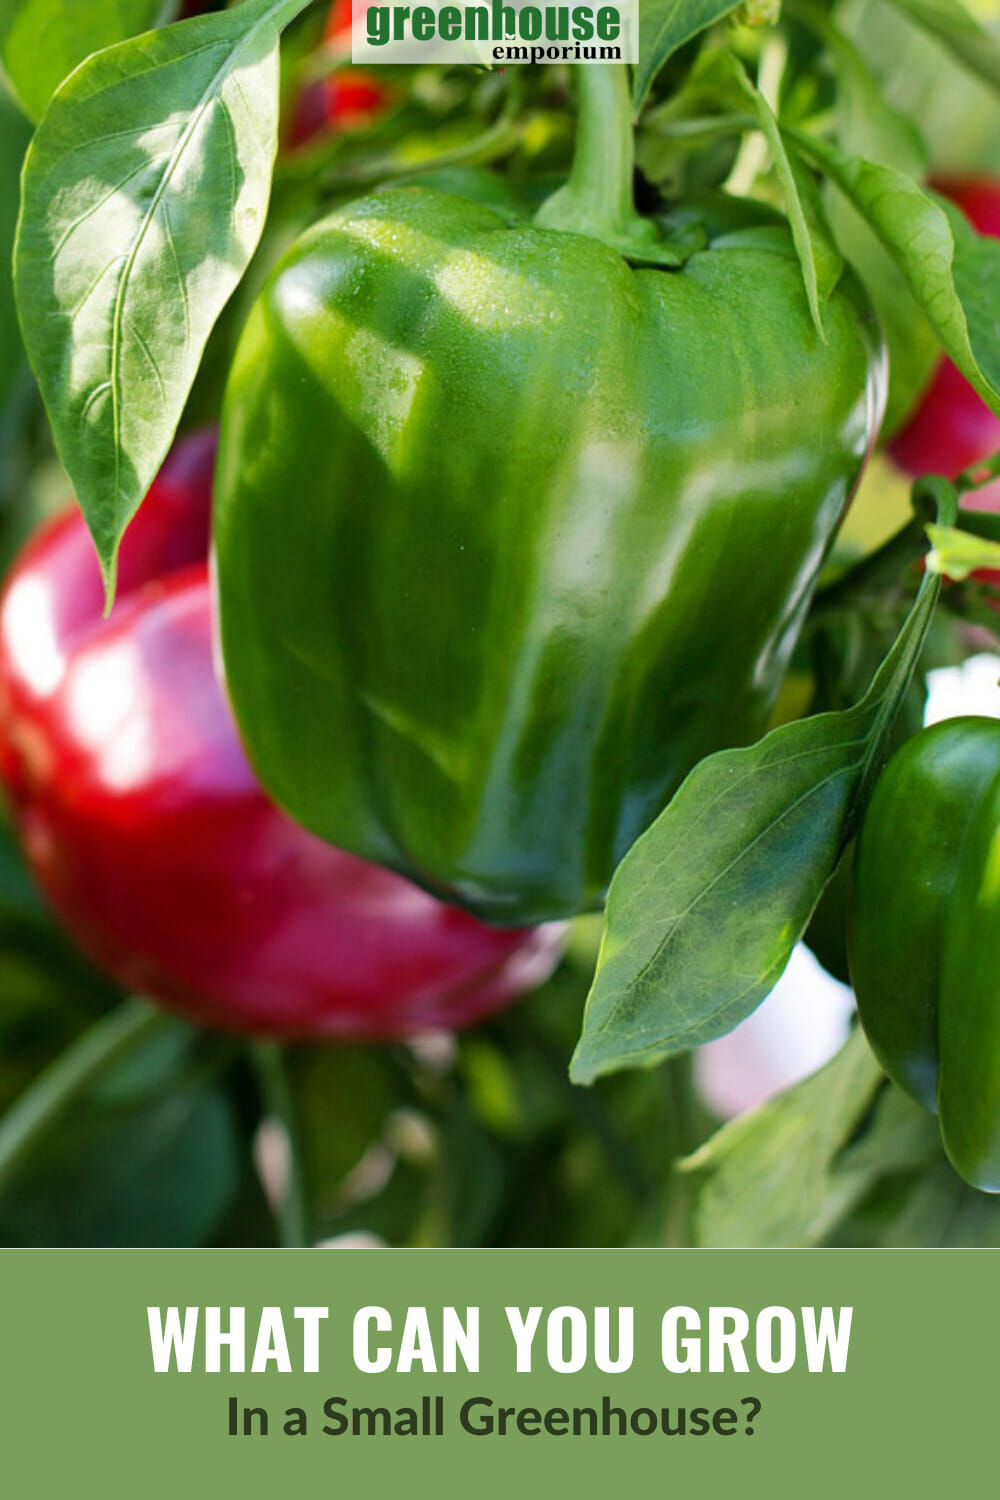 Closeup view of green bell pepper with red bell pepper in background with text: What Can You Grow in a Small Greenhouse?